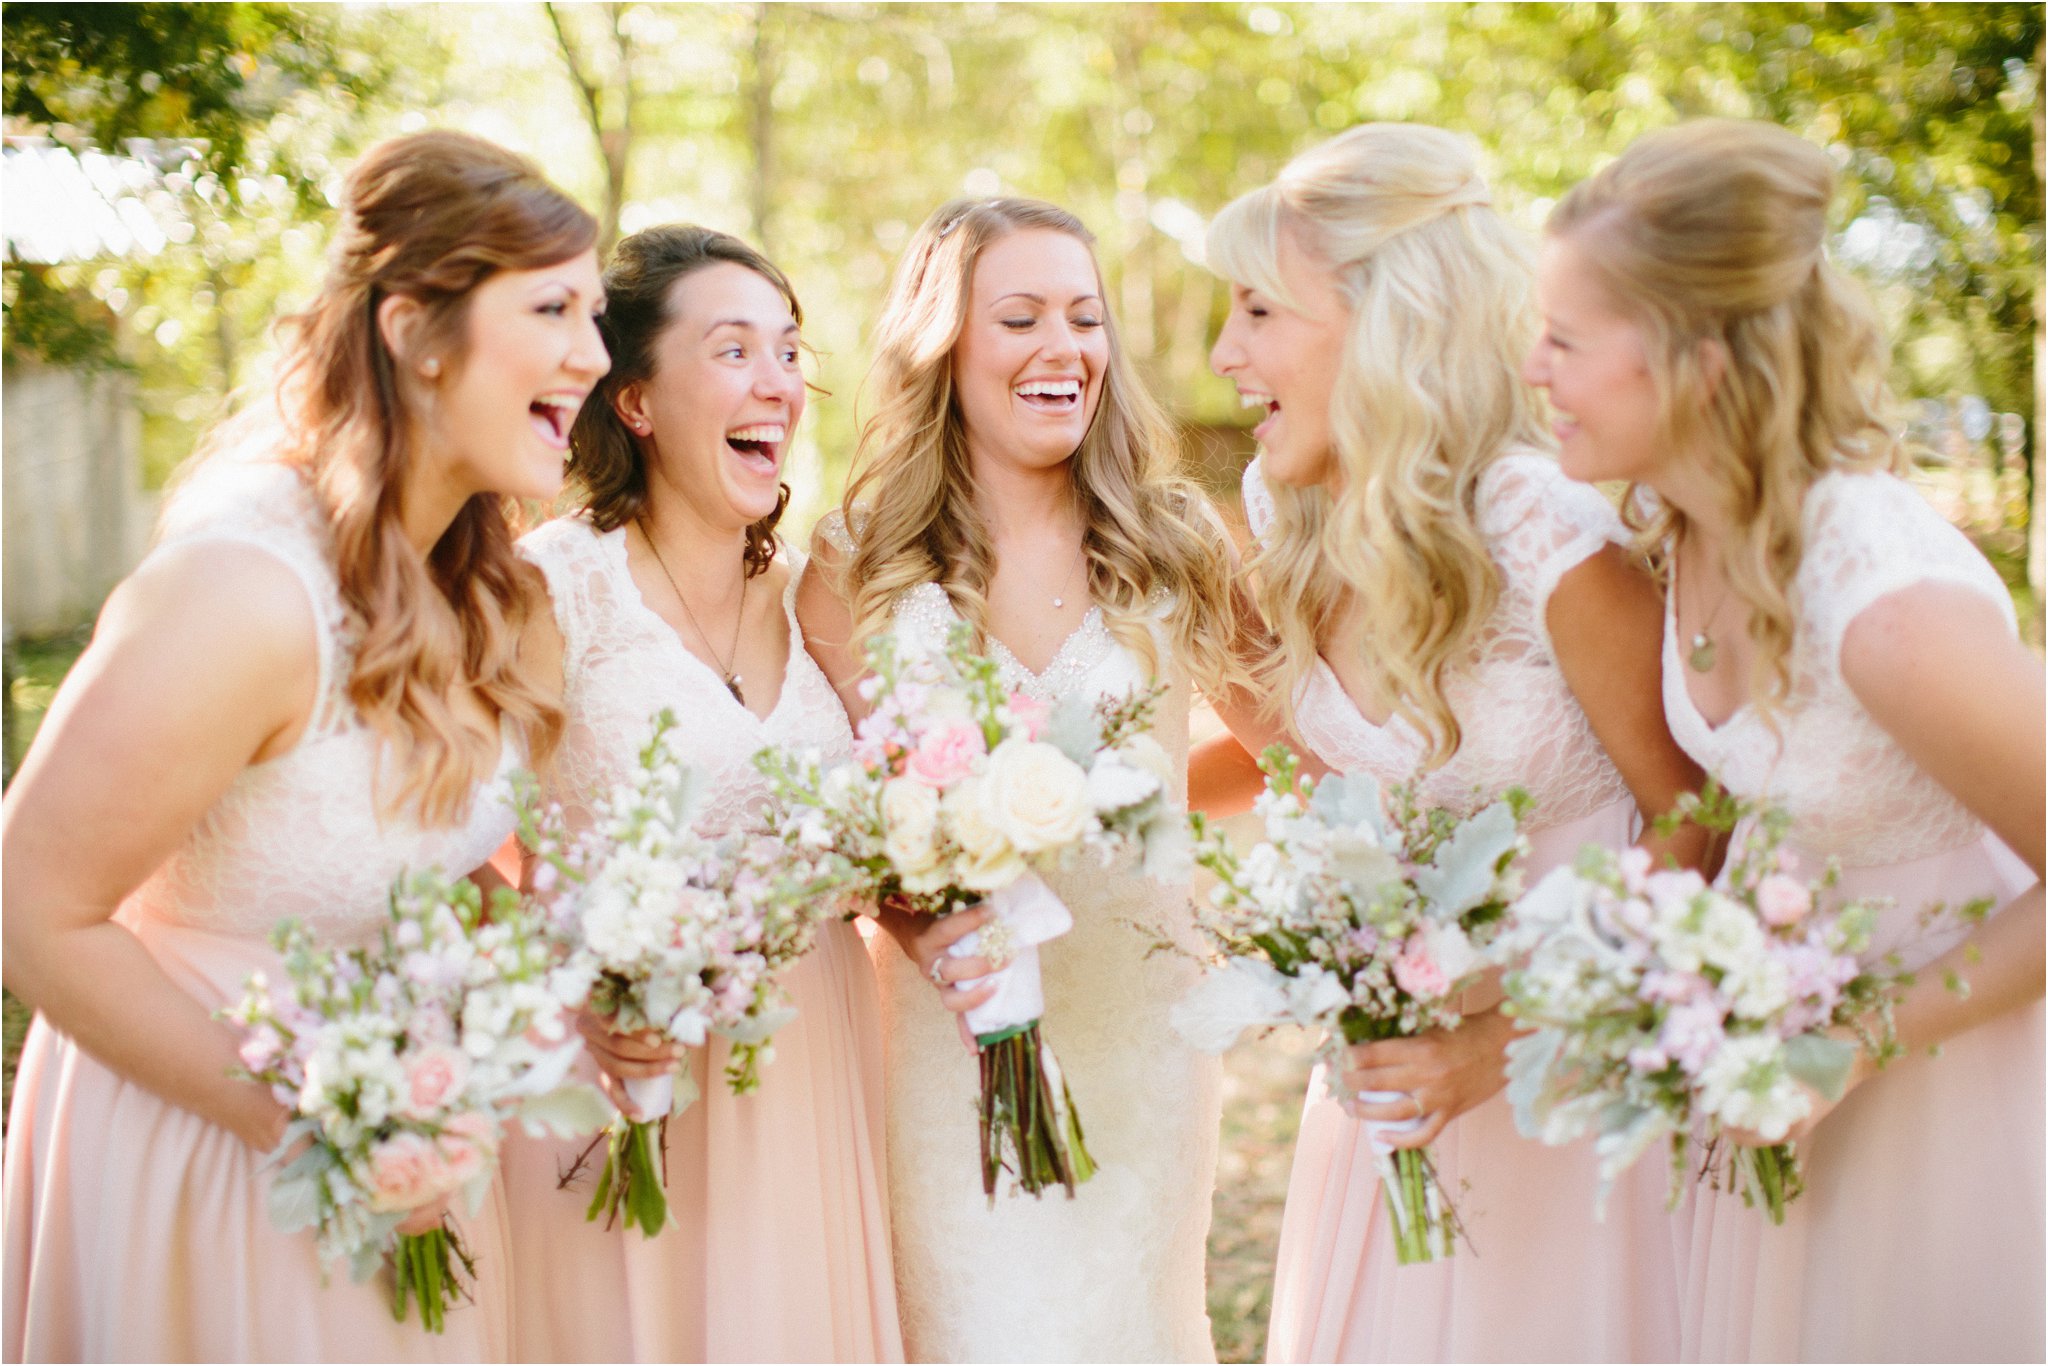 View More: http://tuckerimages.pass.us/jannisewedding